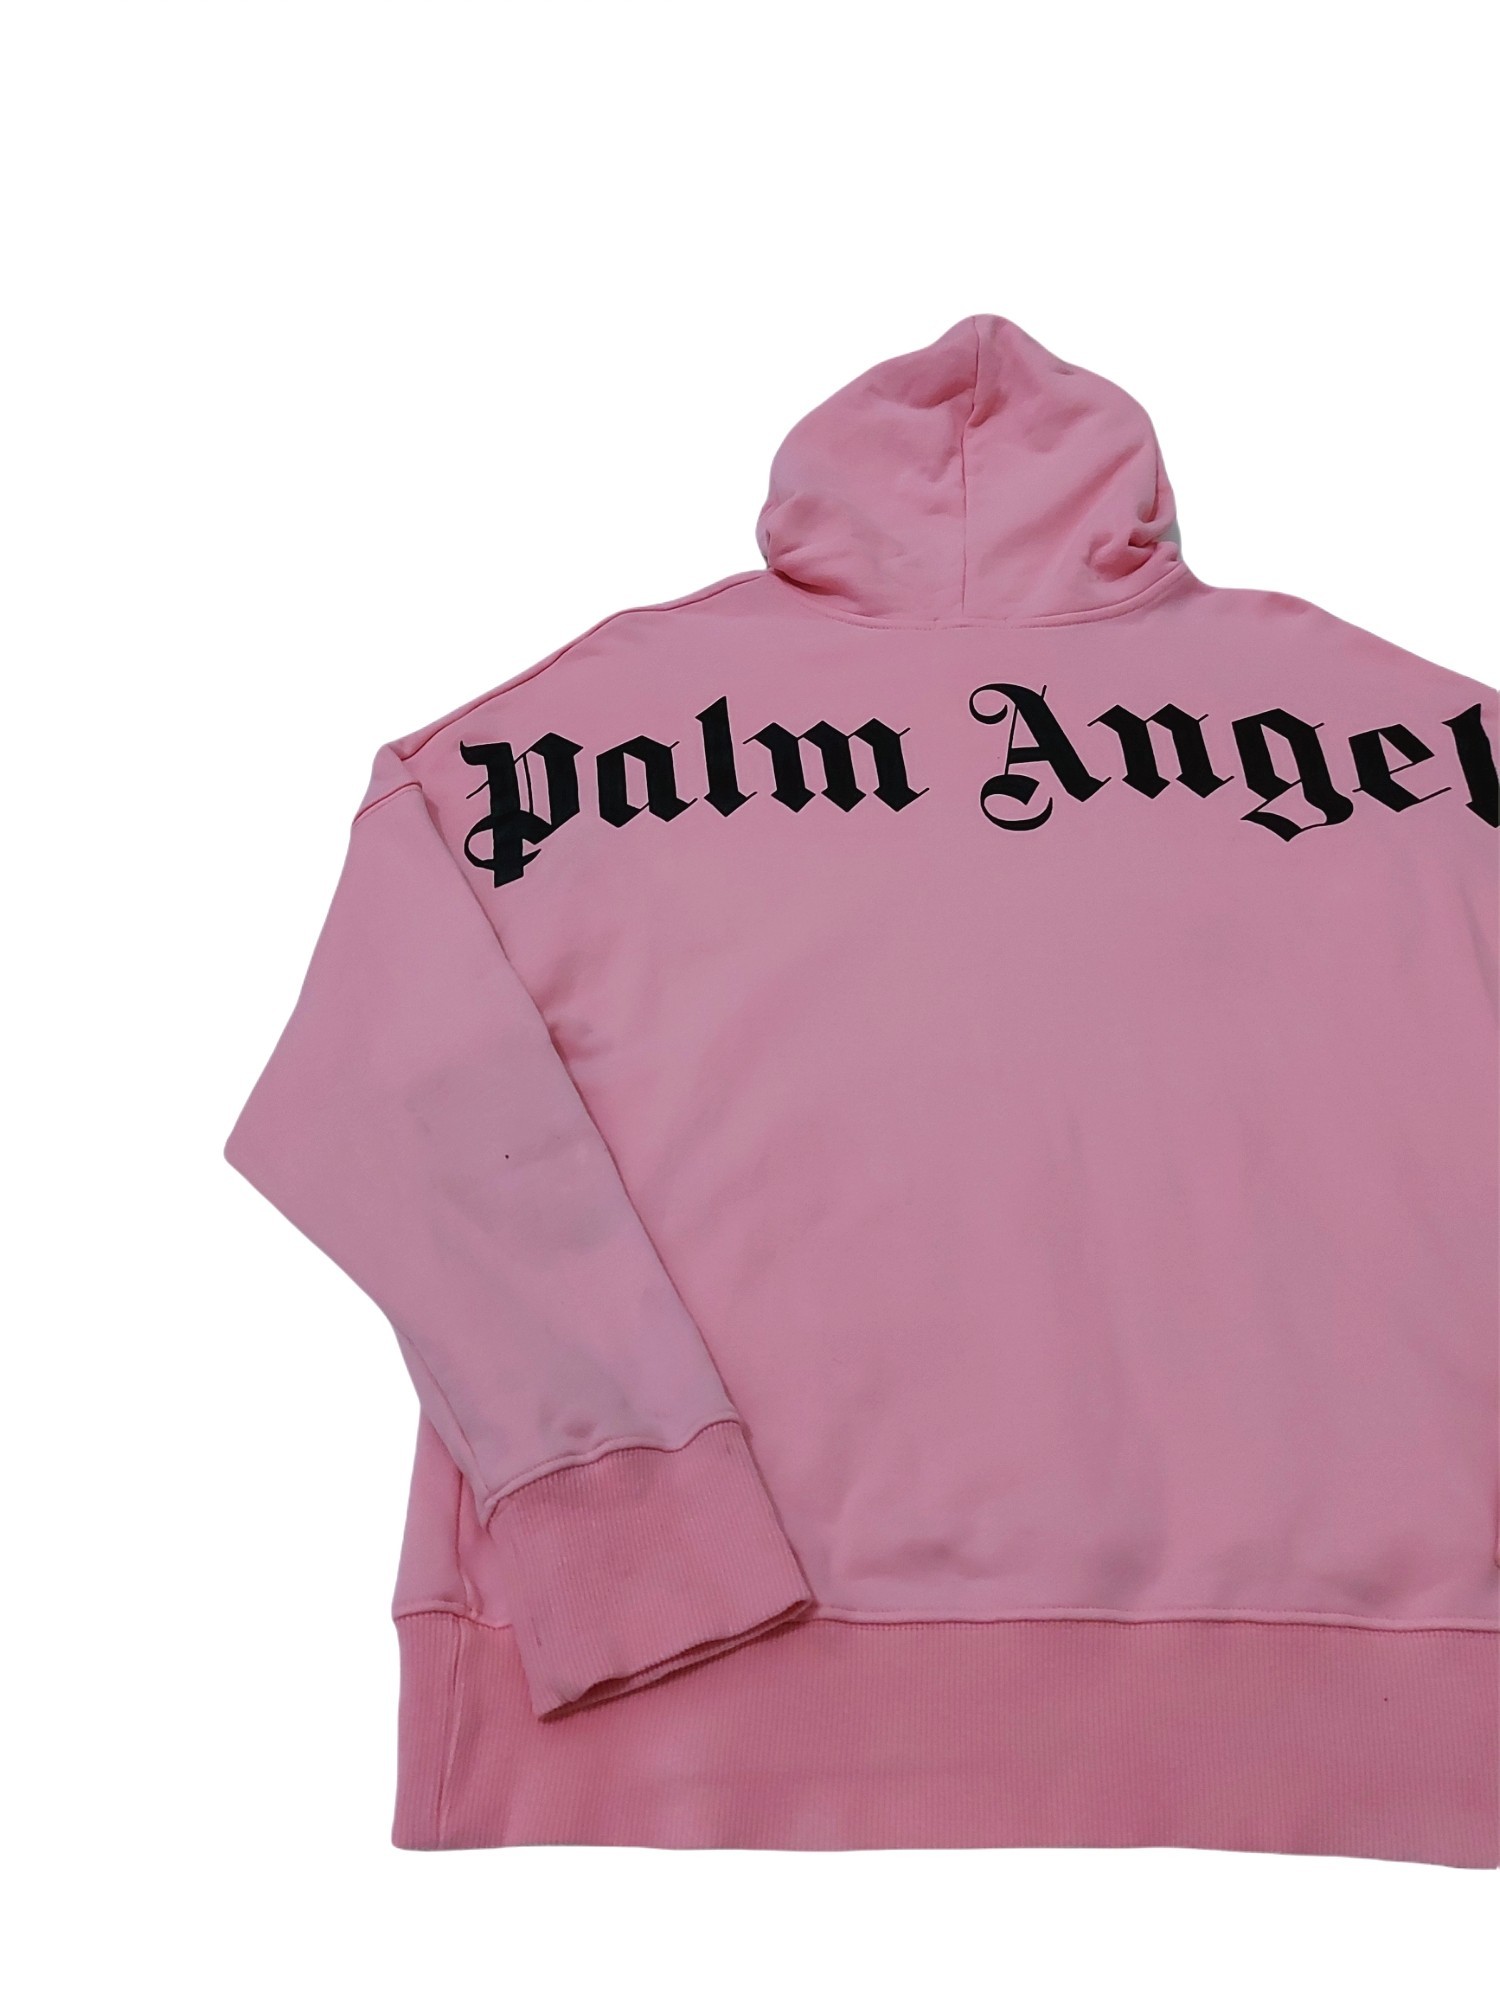 RARE! PALM ANGELS CLASSIC BIG SPELL OUT BACK HIT - 3